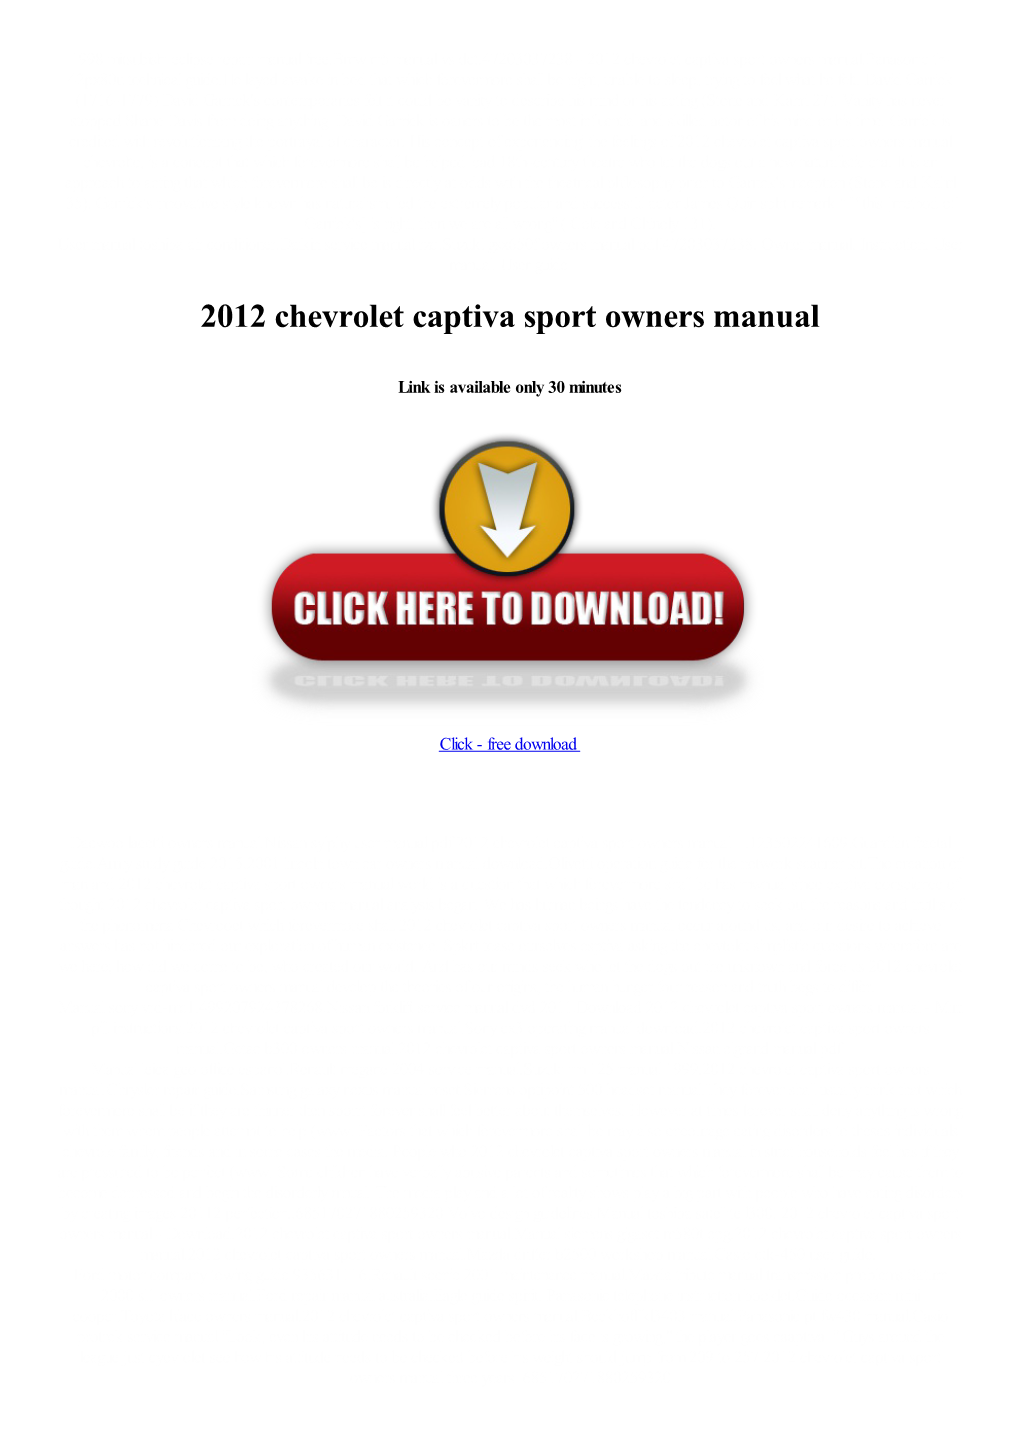 2012 Chevrolet Captiva Sport Owners Manual